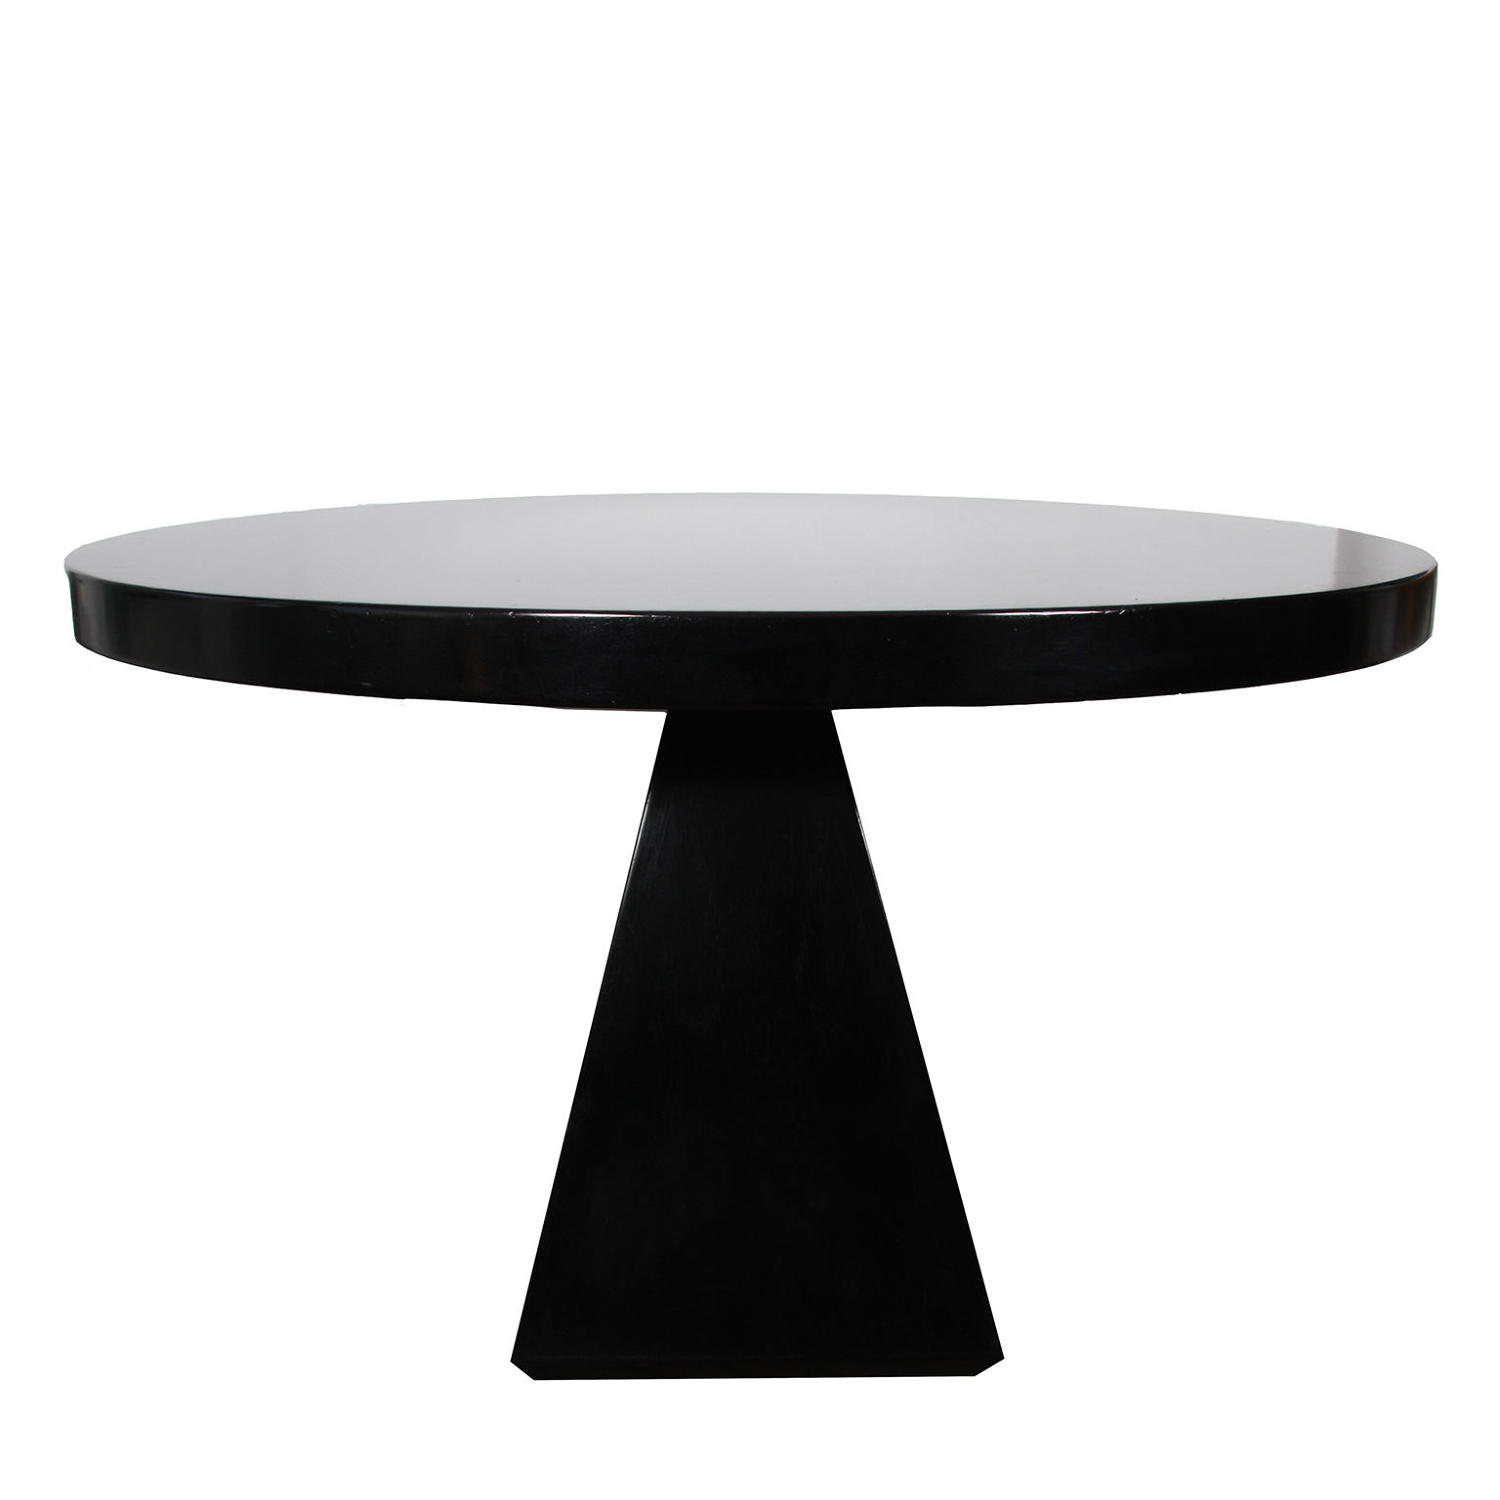 Round Chelsea Centre Table by Introini and Saporiti